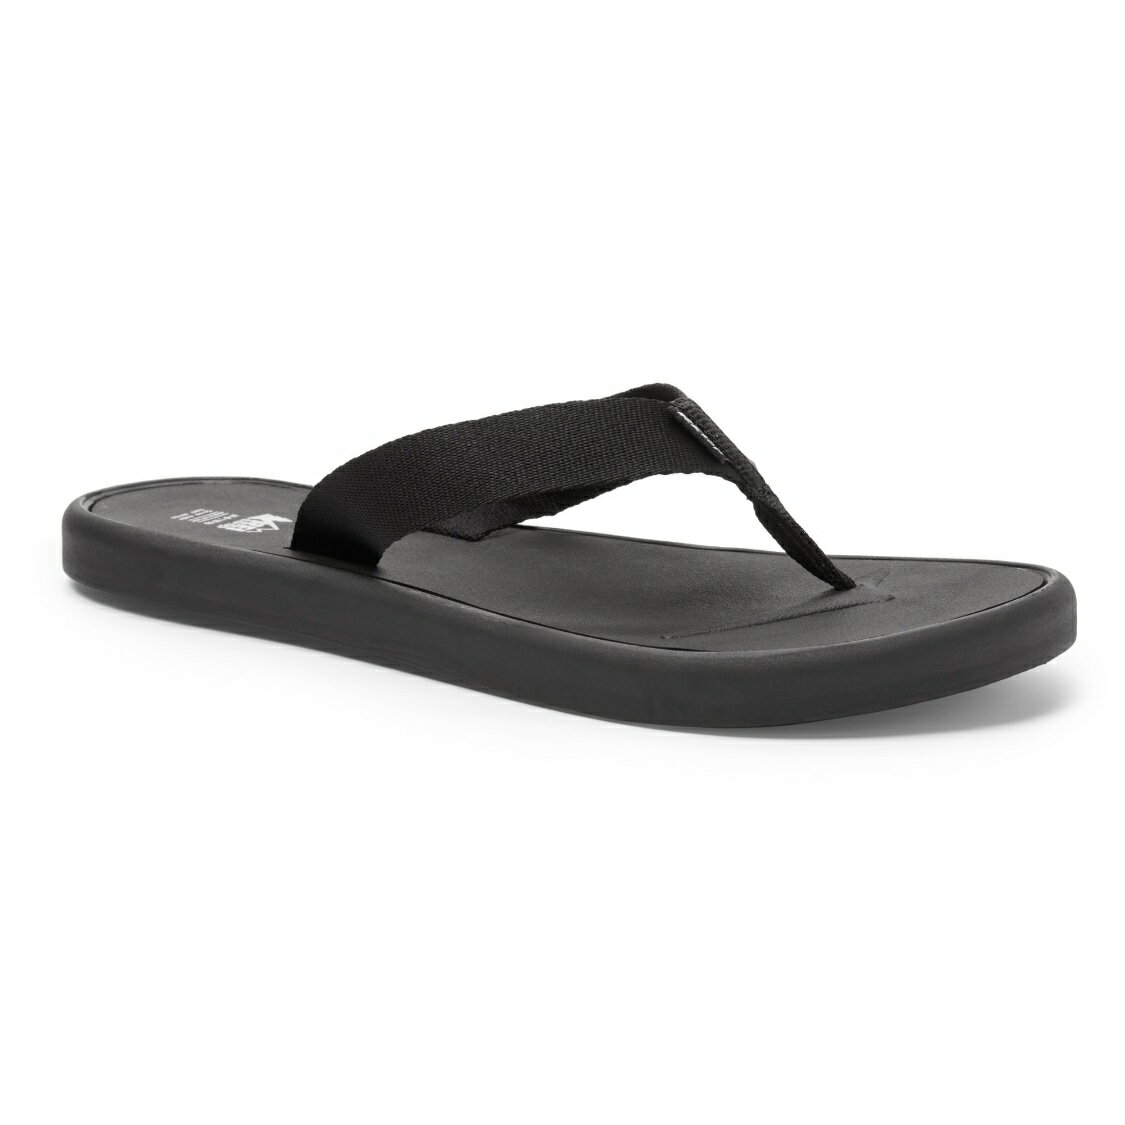 REI Co-op Black Recycled Strap Flip-Flops ビーチサンダル